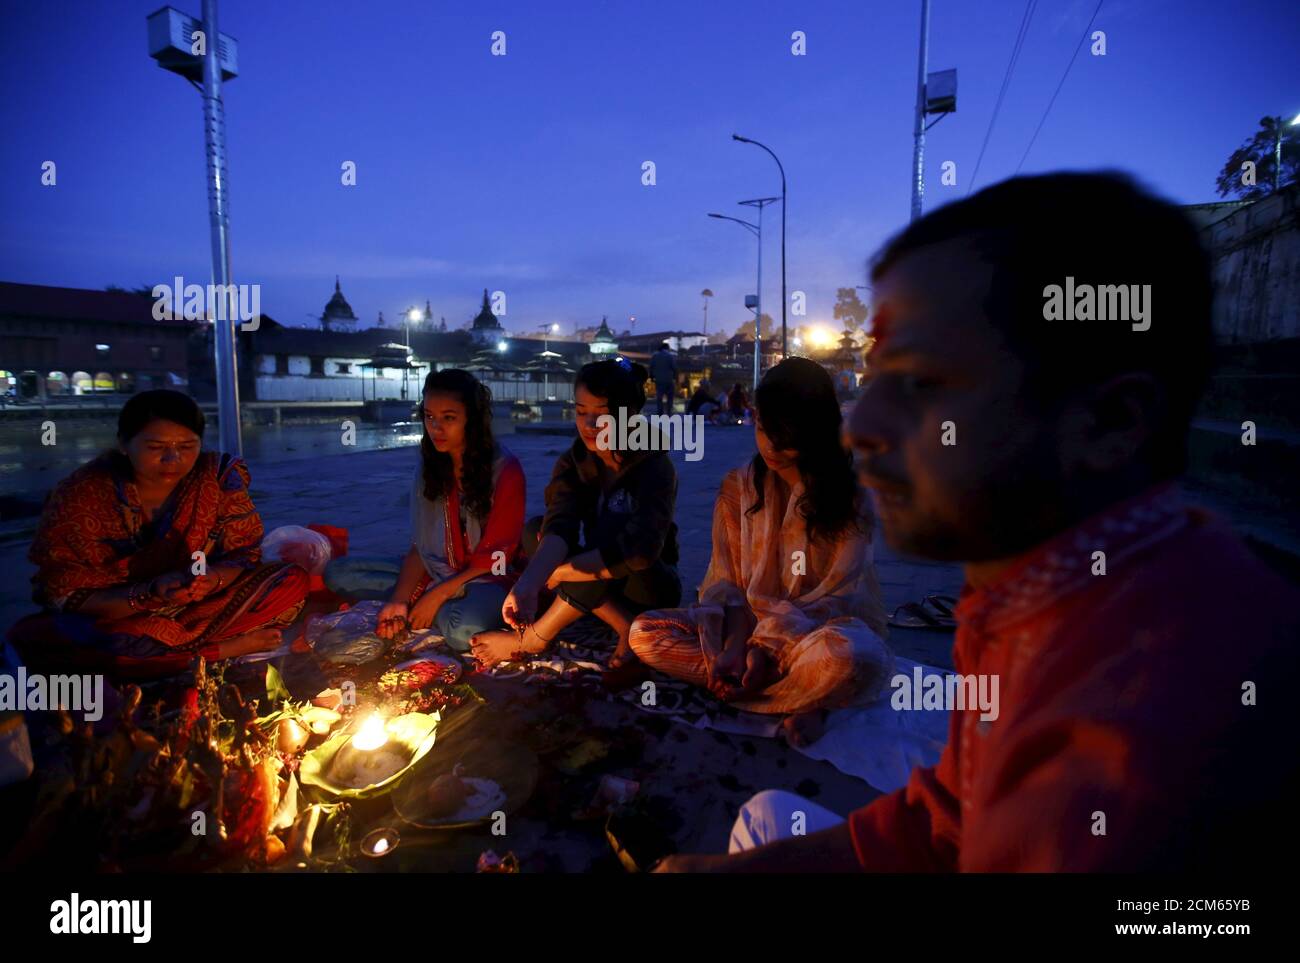 Nepalese women offer prayers along the bank of the Bagmati River, during the Rishi Panchami festival, in Kathmandu, Nepal September 18, 2015. Rishi Panchami is observed on the last day of Teej when women worship Sapta Rishi (Seven Saints) to ask for forgiveness for sins committed during their menstrual periods throughout the year. The Hindu religion considers menstruation as a representation of impurity and women are prohibited from taking part in religious practices during their monthly menstruations. REUTERS/Navesh Chitrakar Stock Photo